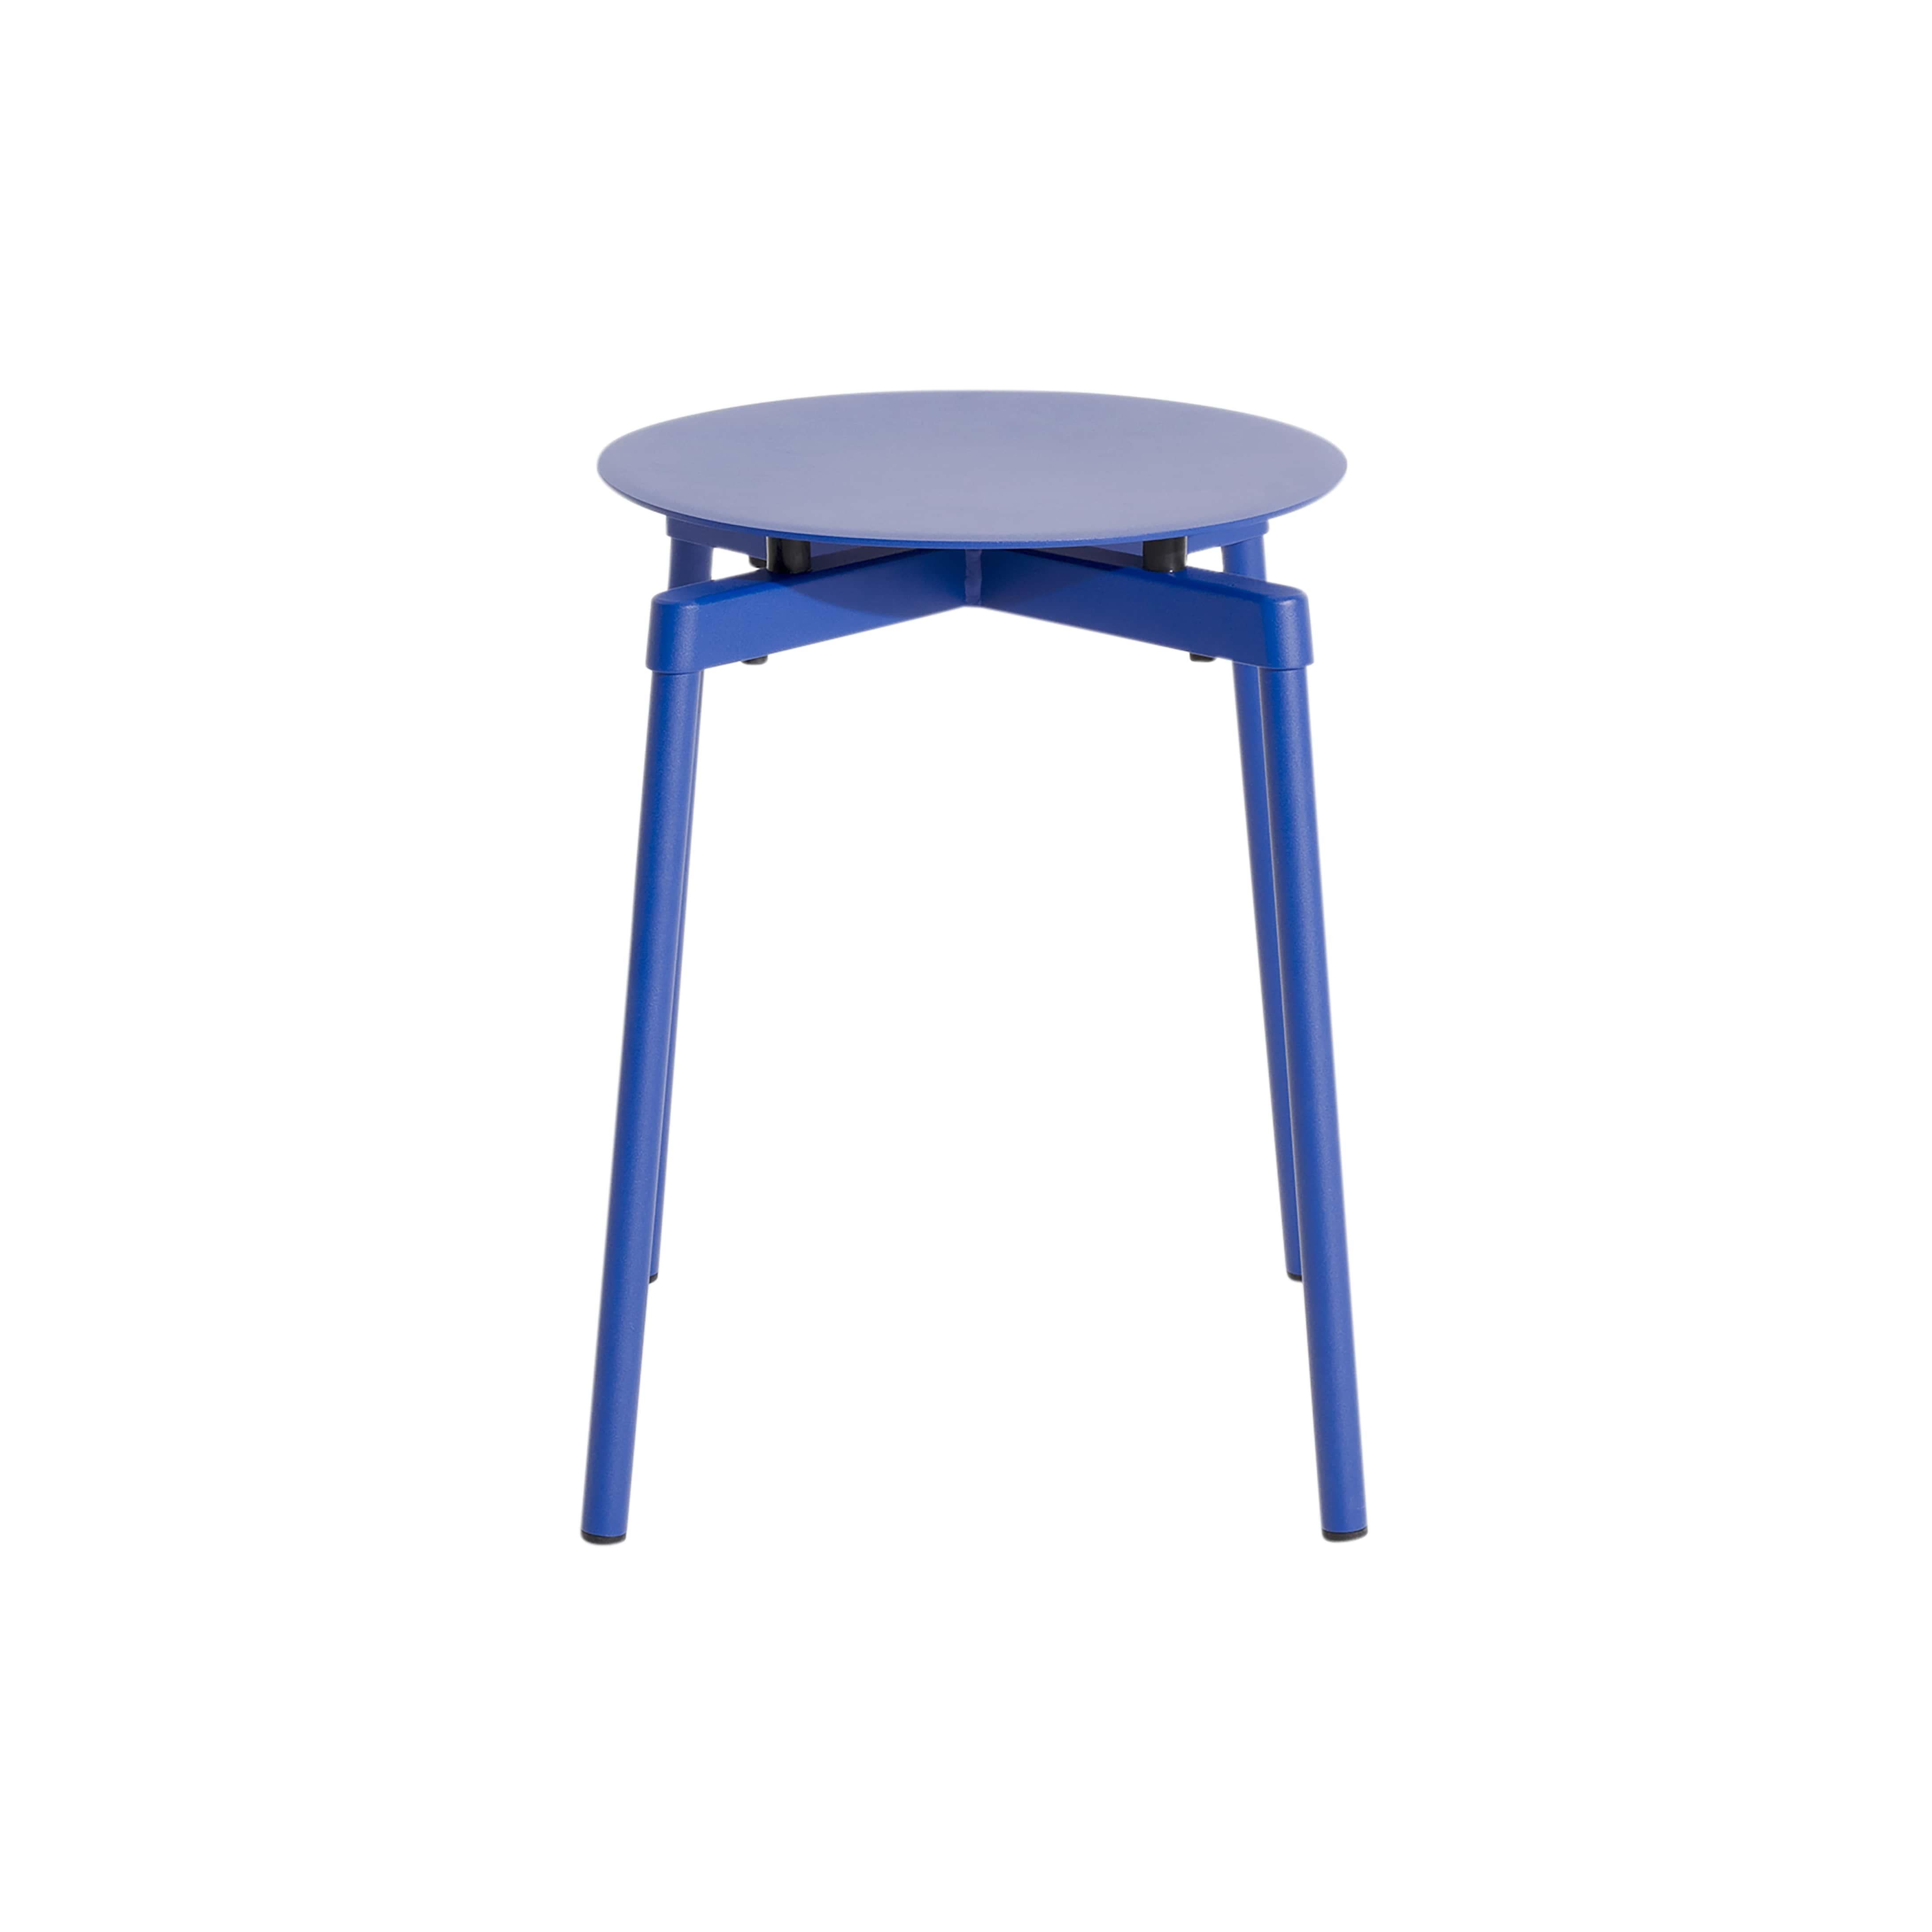 Petite Friture Fromme Stool in Blue Aluminium by Tom Chung, 2020

The Fromme collection stands out by its pure line and compact design. Absorbers placed under the seating gives a soft and very comfortable flexibility to seats. Made from aluminium,